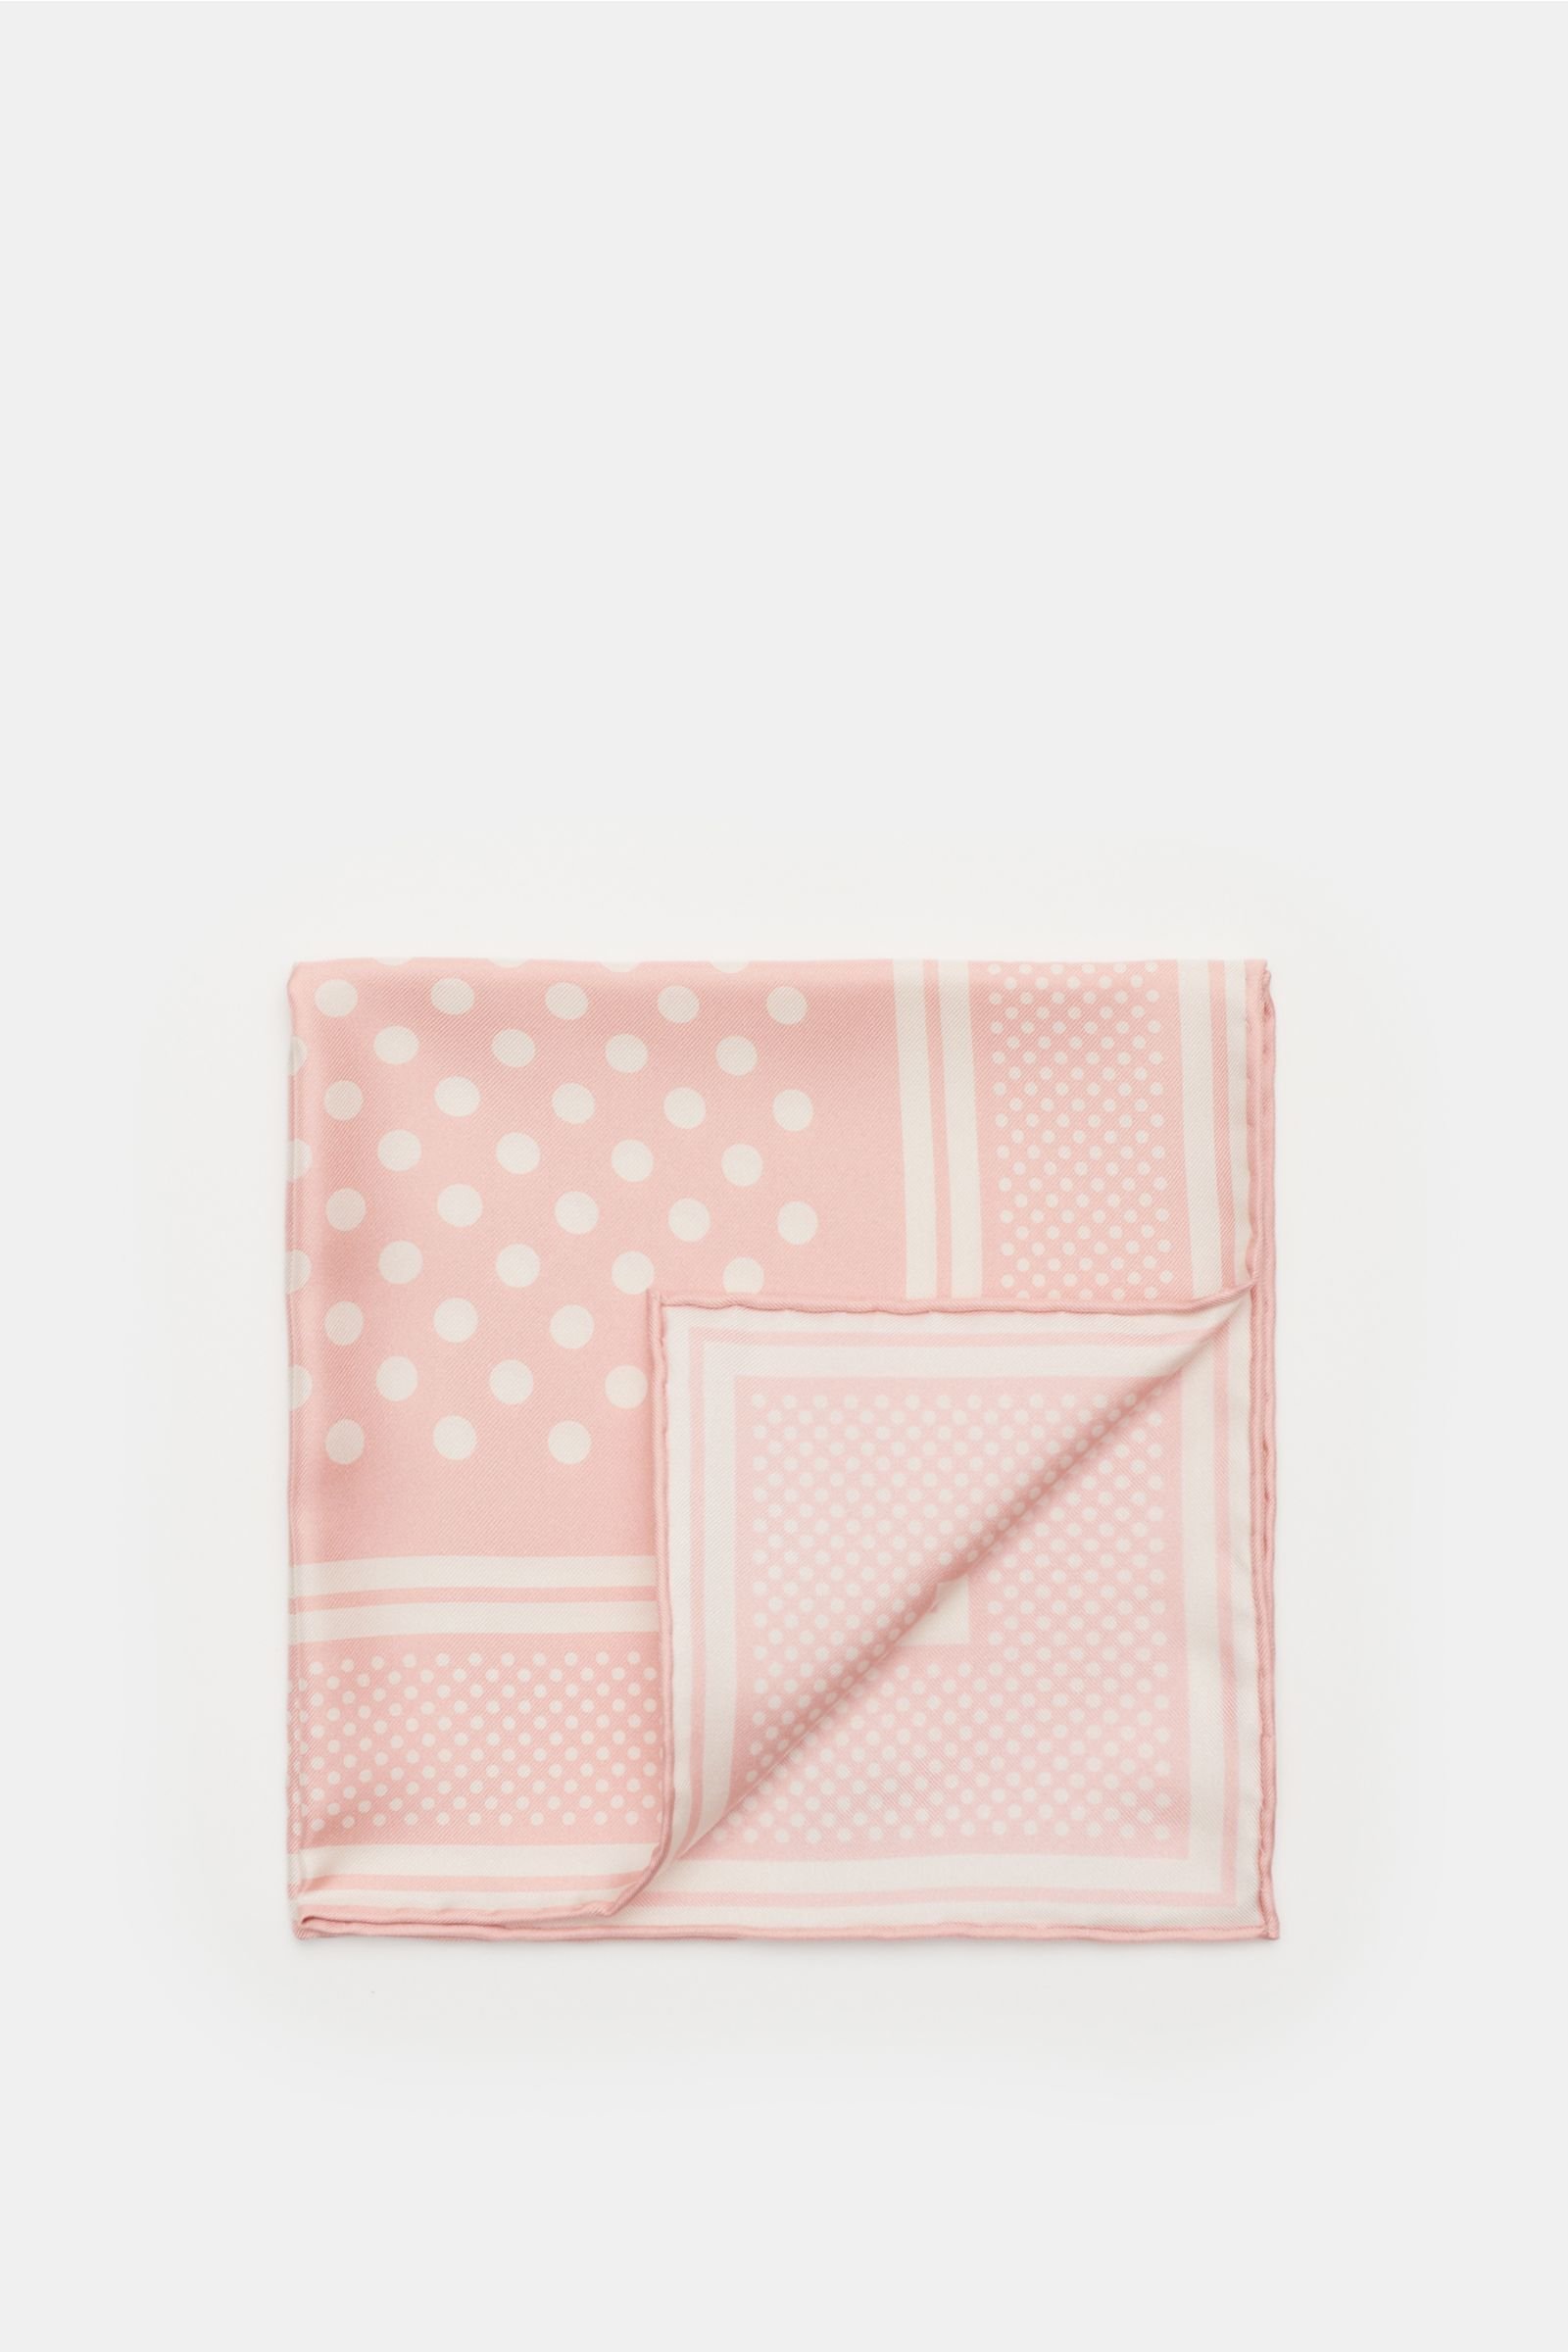 Pocket square antique pink/white dotted